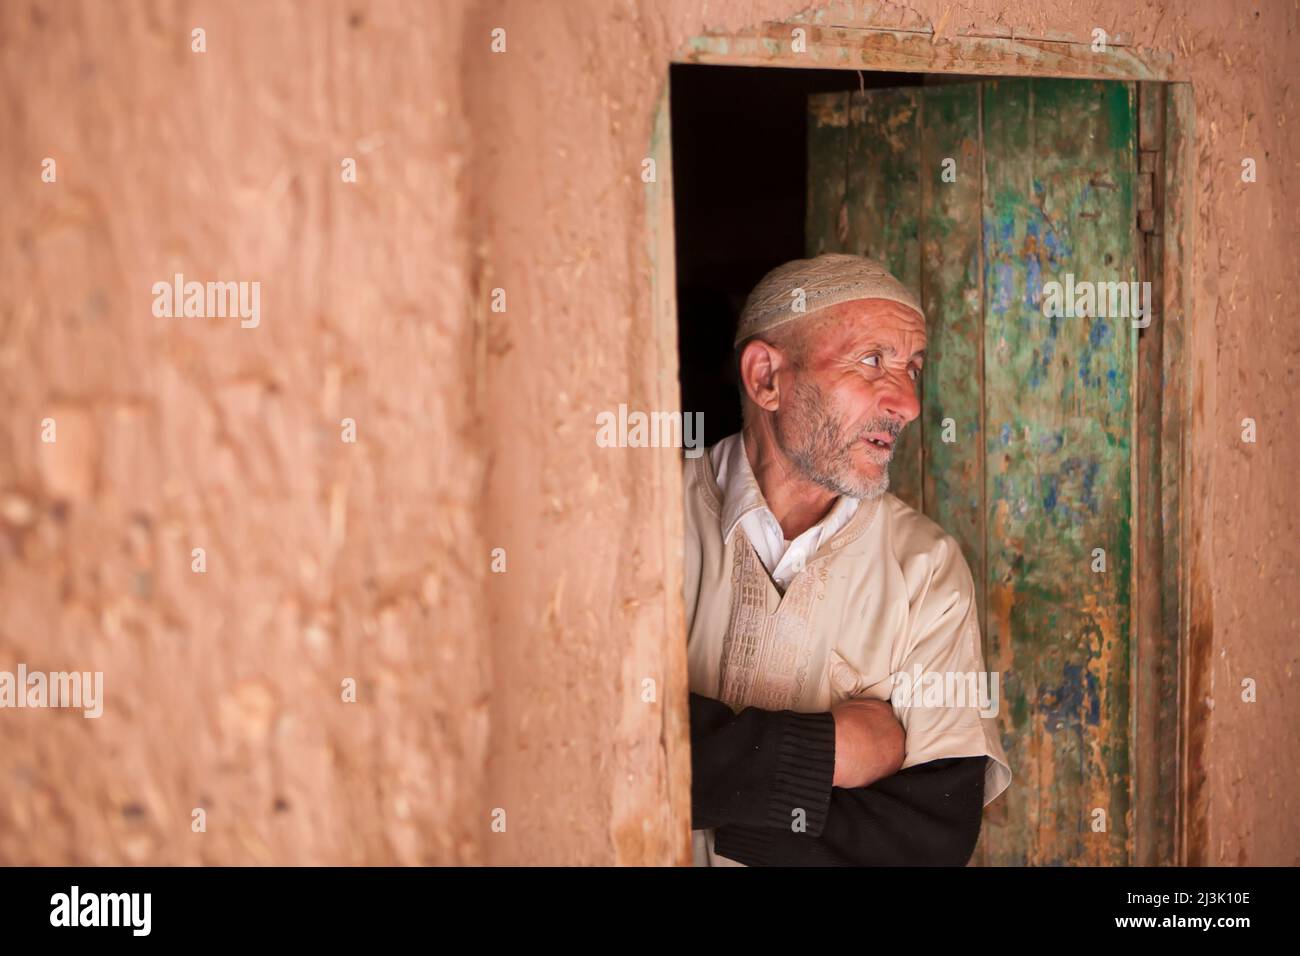 A mature man in traditional clothing stands in a doorway looking out in Ait Benhaddou, Morocco, a small village in the High Atlas Mountains where s... Stock Photo